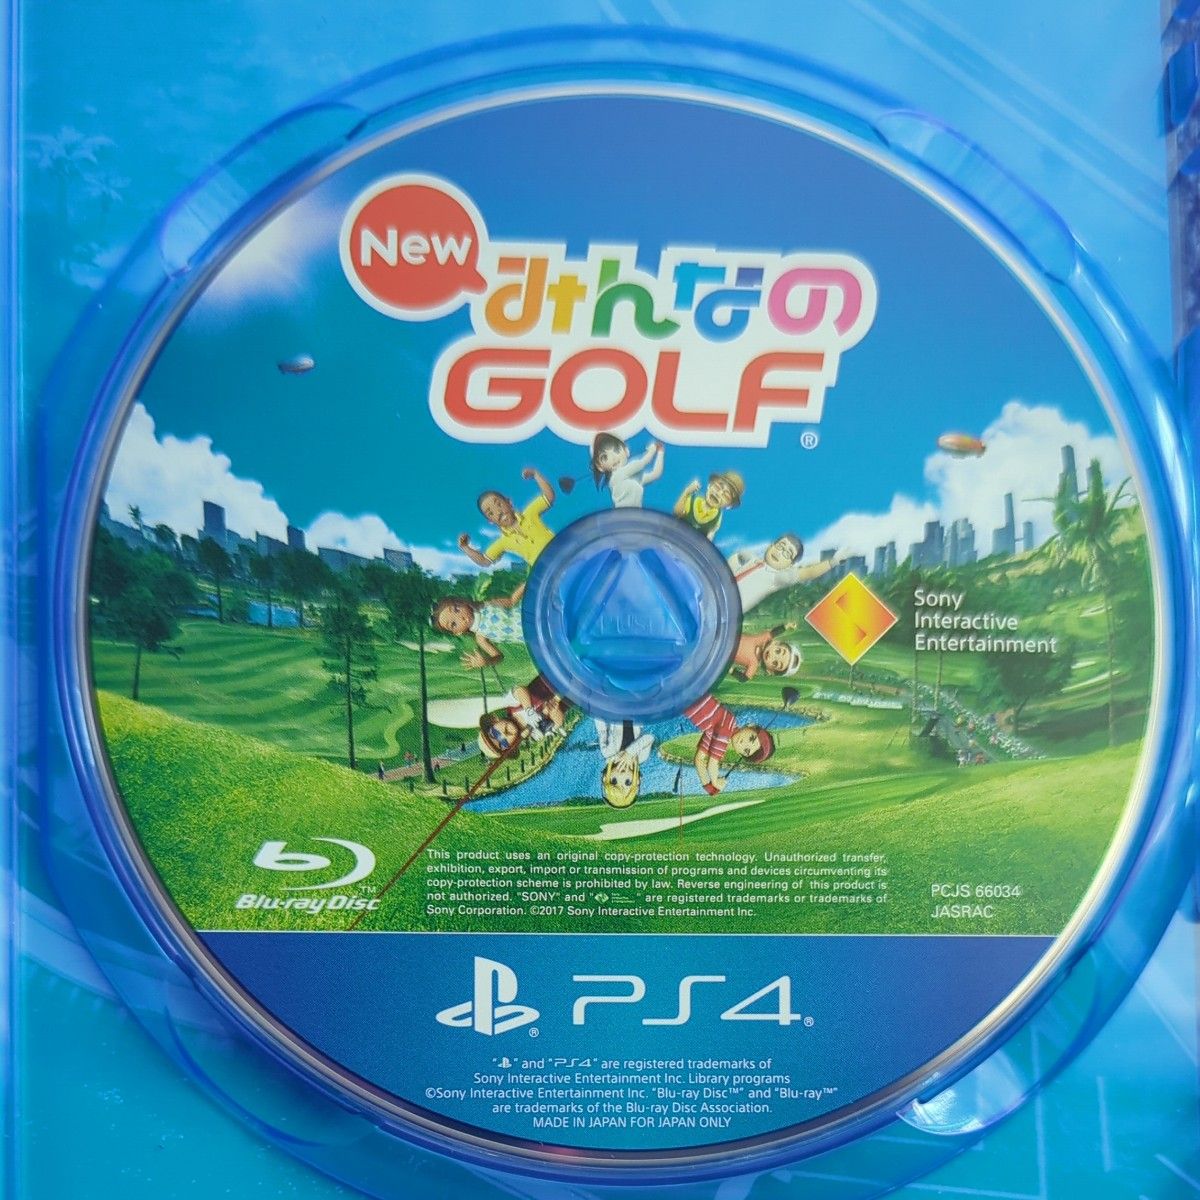 【PS4】 New みんなのGOLF [Value Selection]